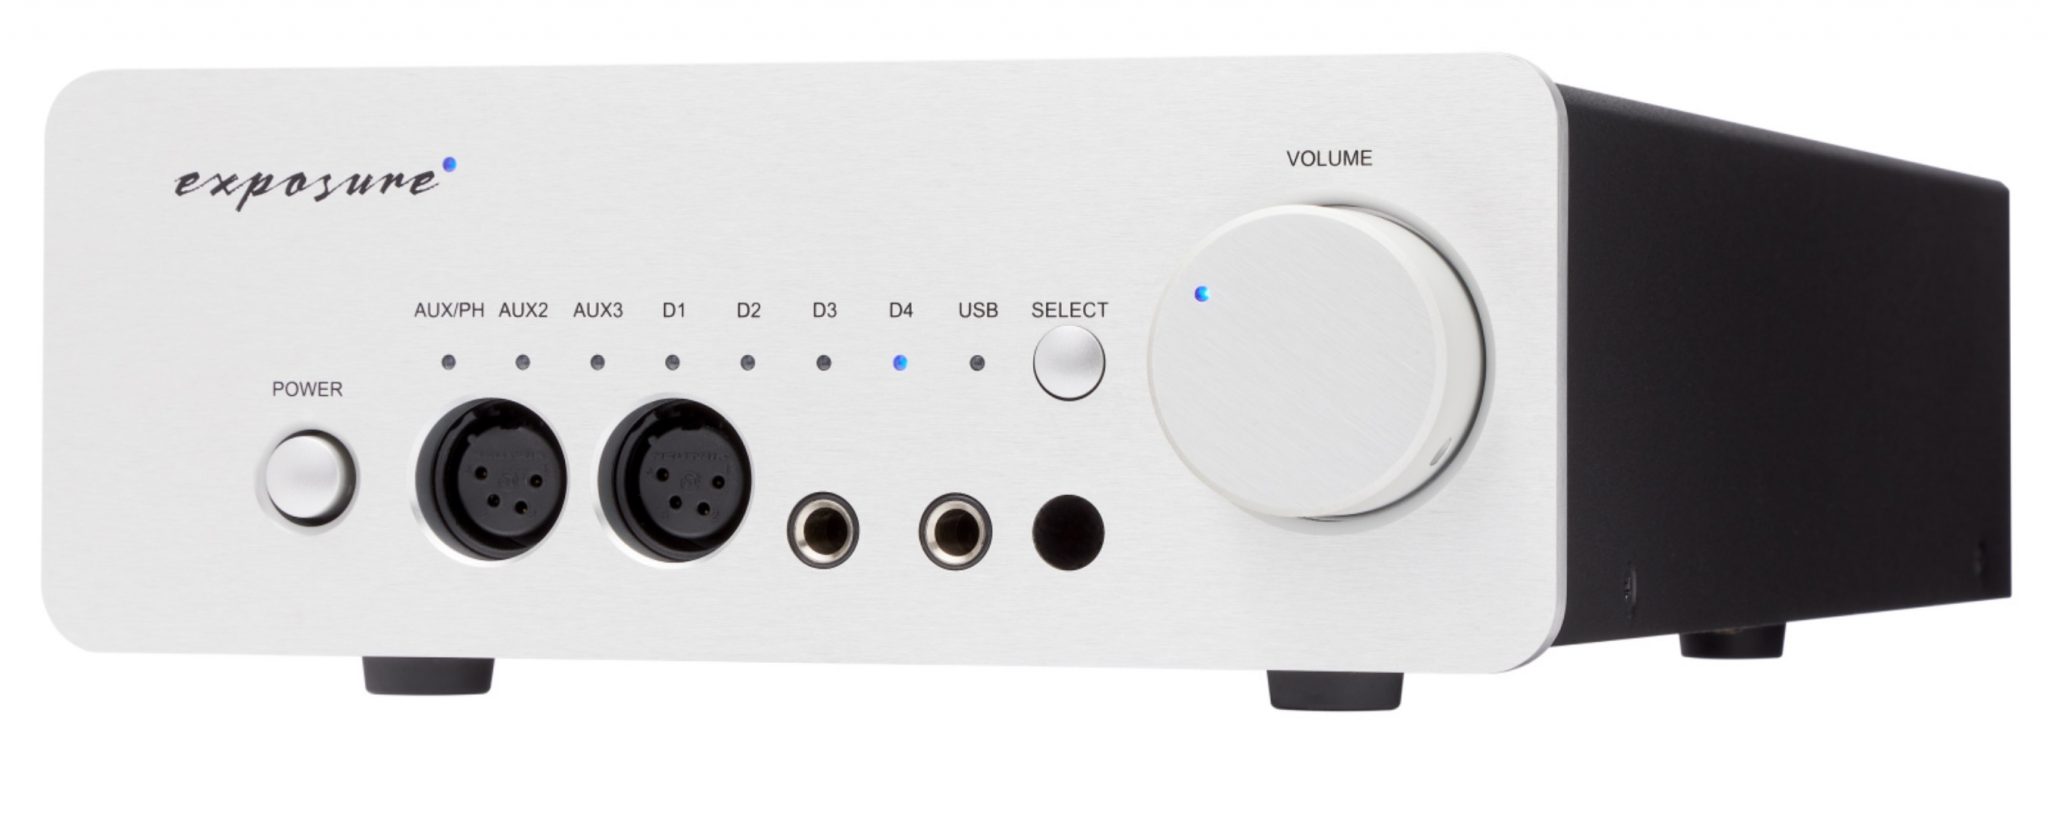 HP headphone amplifier and DAC from Exposure